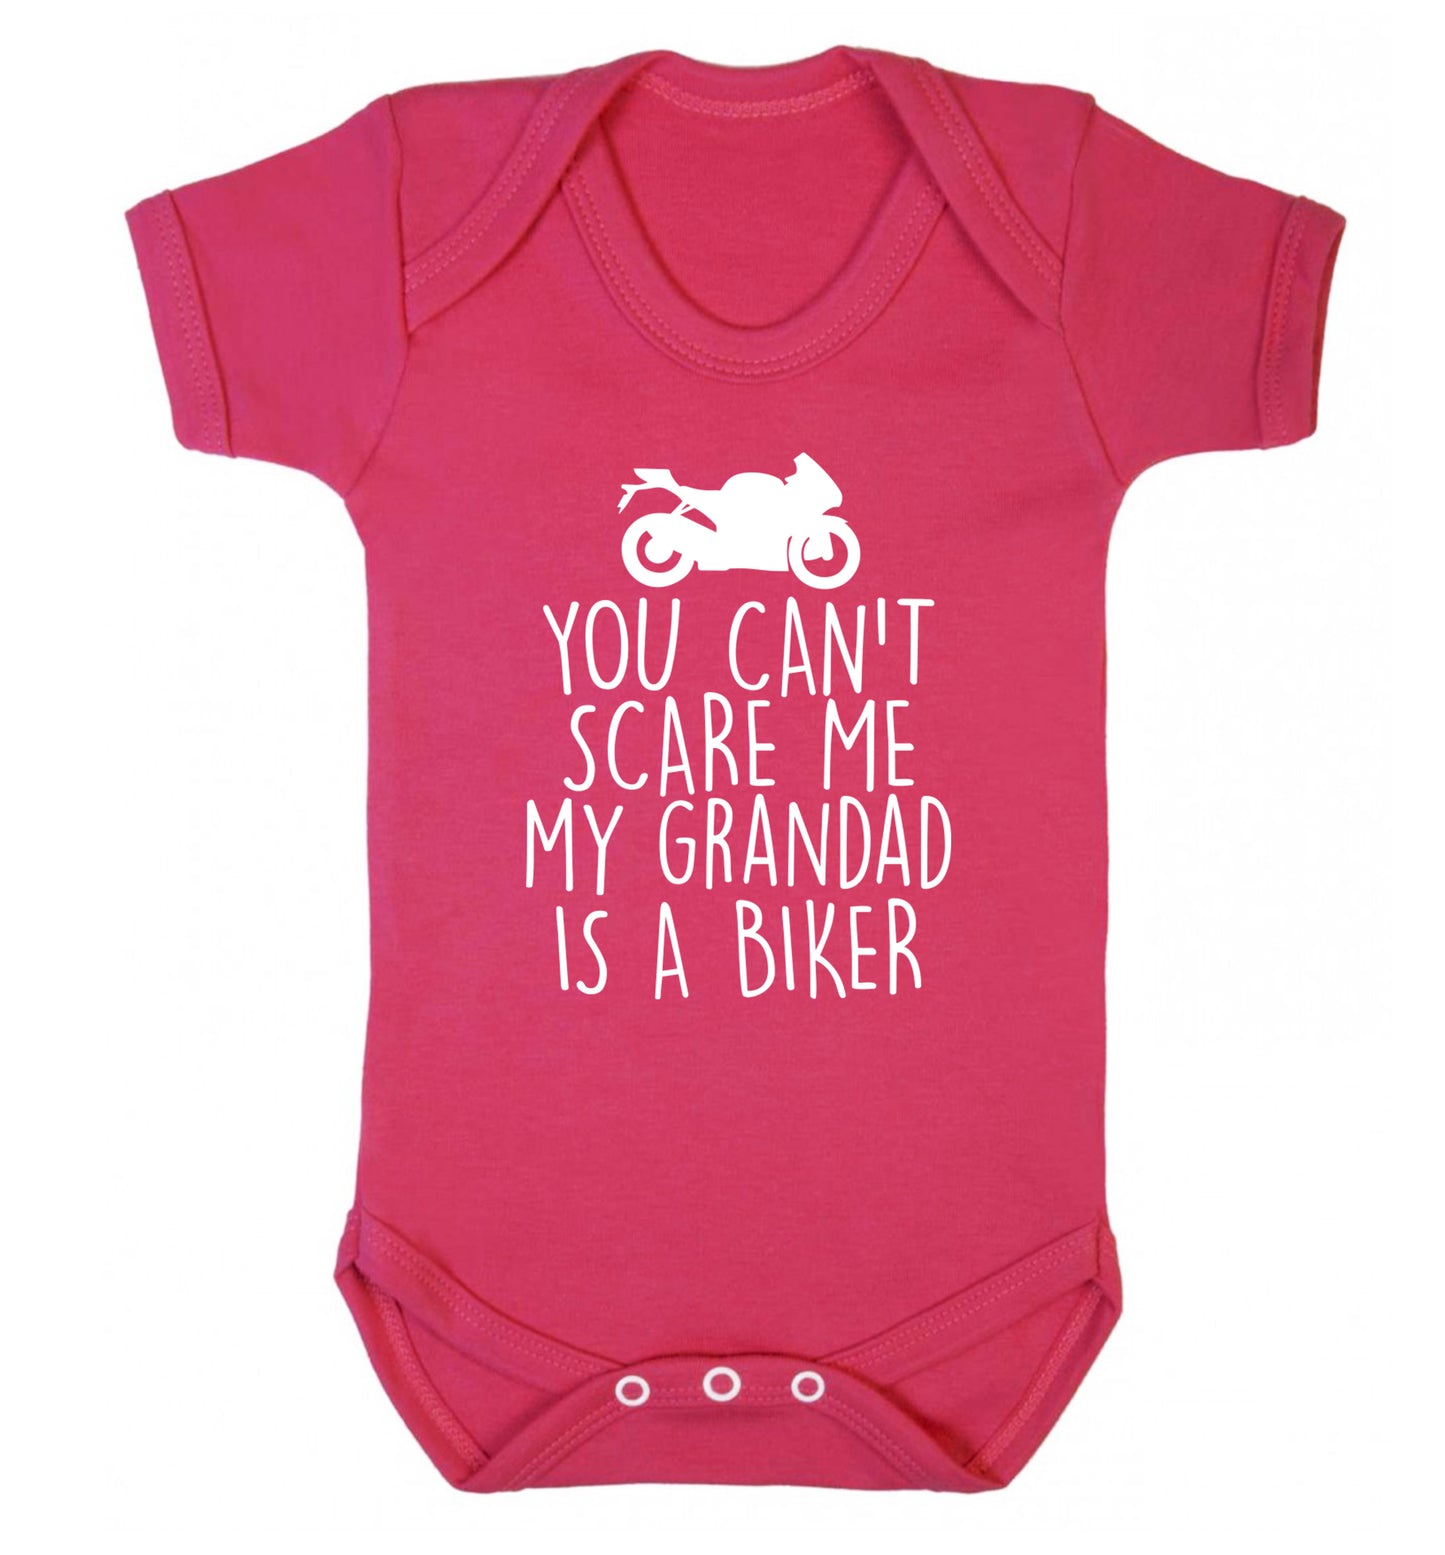 You can't scare me my grandad is a biker Baby Vest dark pink 18-24 months